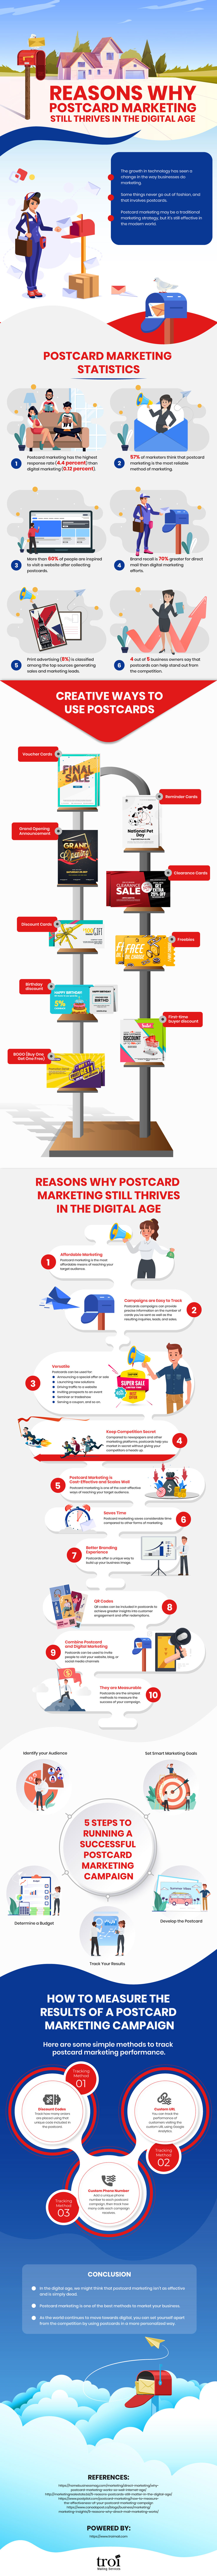 Reasons Why Postcard Marketing Still Thrives - Infographic